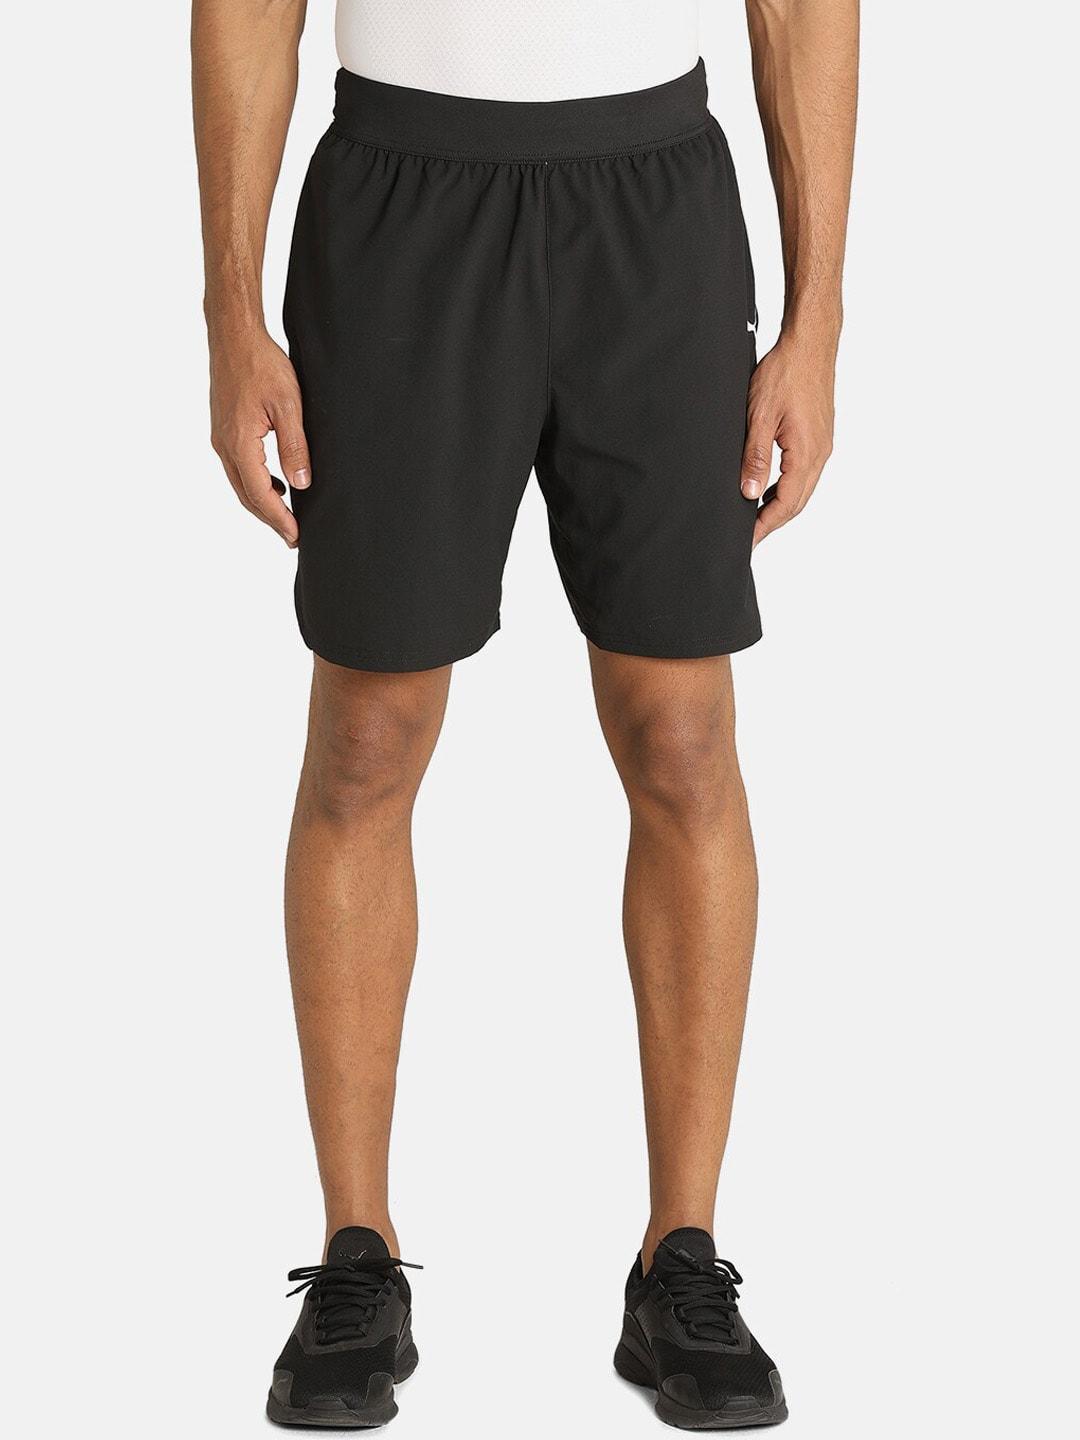 Puma Men Black dryCELL Training or Gym Sports Sustainable Shorts